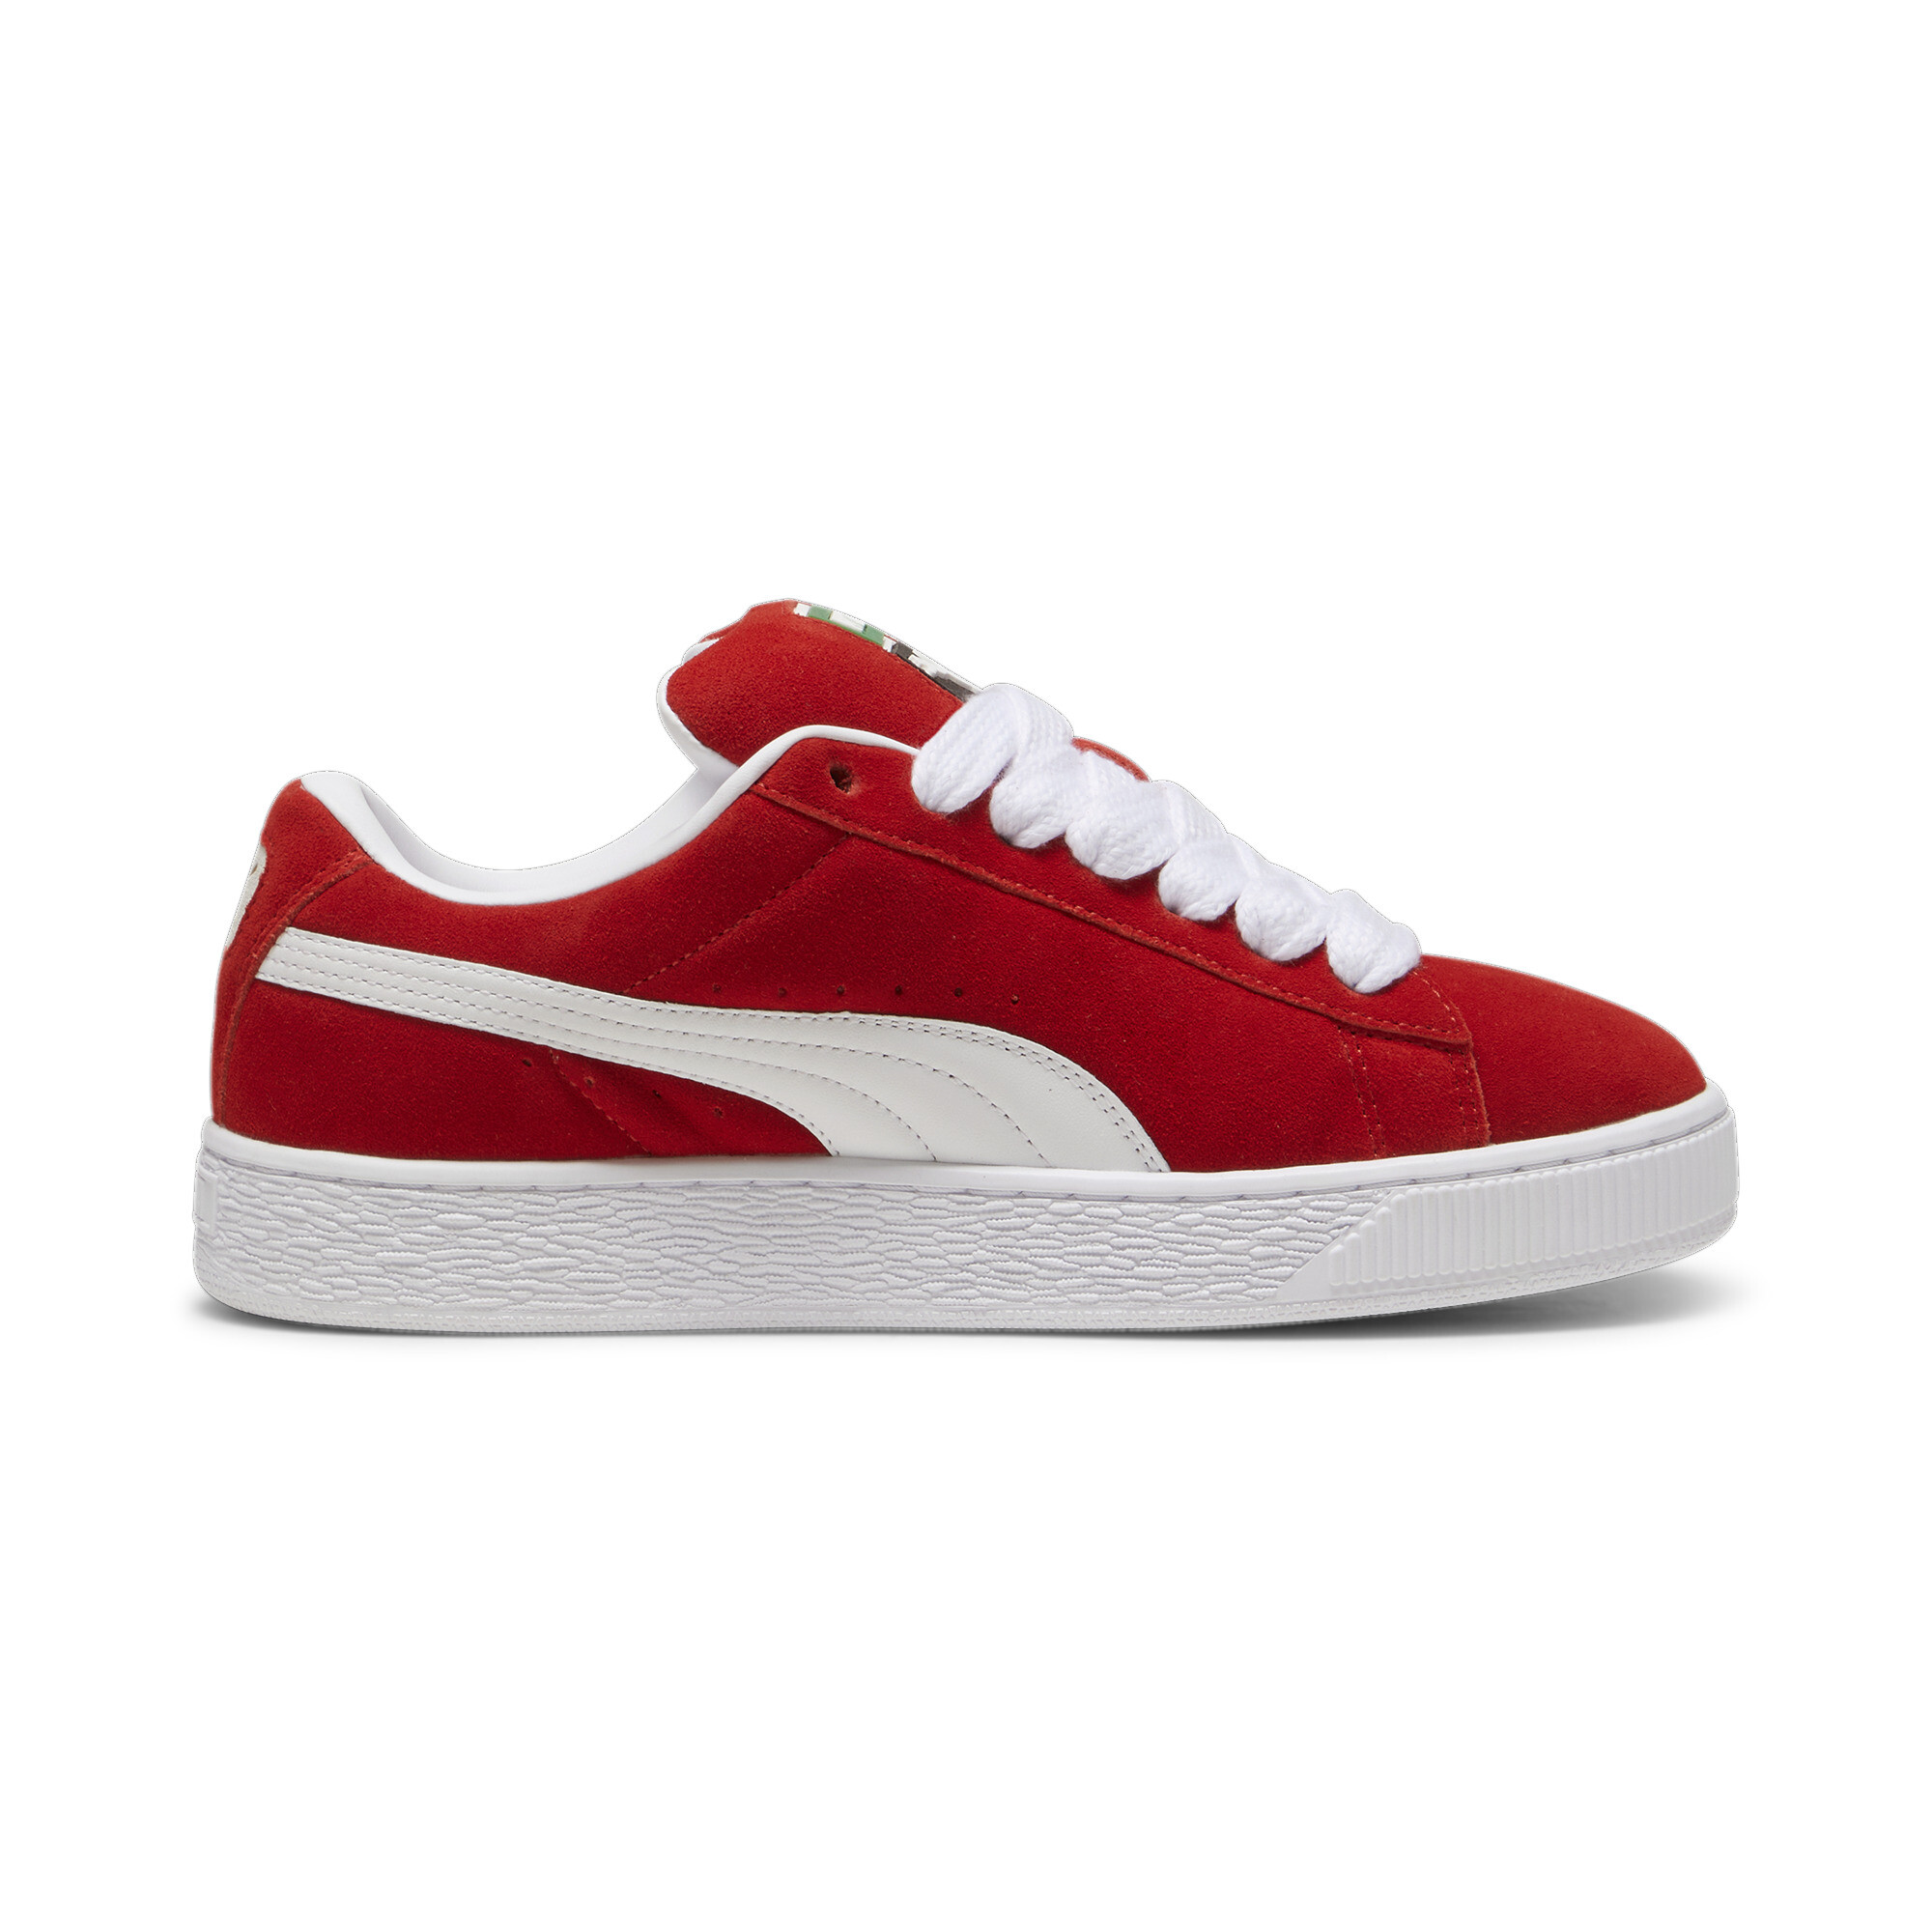 Puma Suede XL Sneakers Unisex, Red, Size 40, Shoes